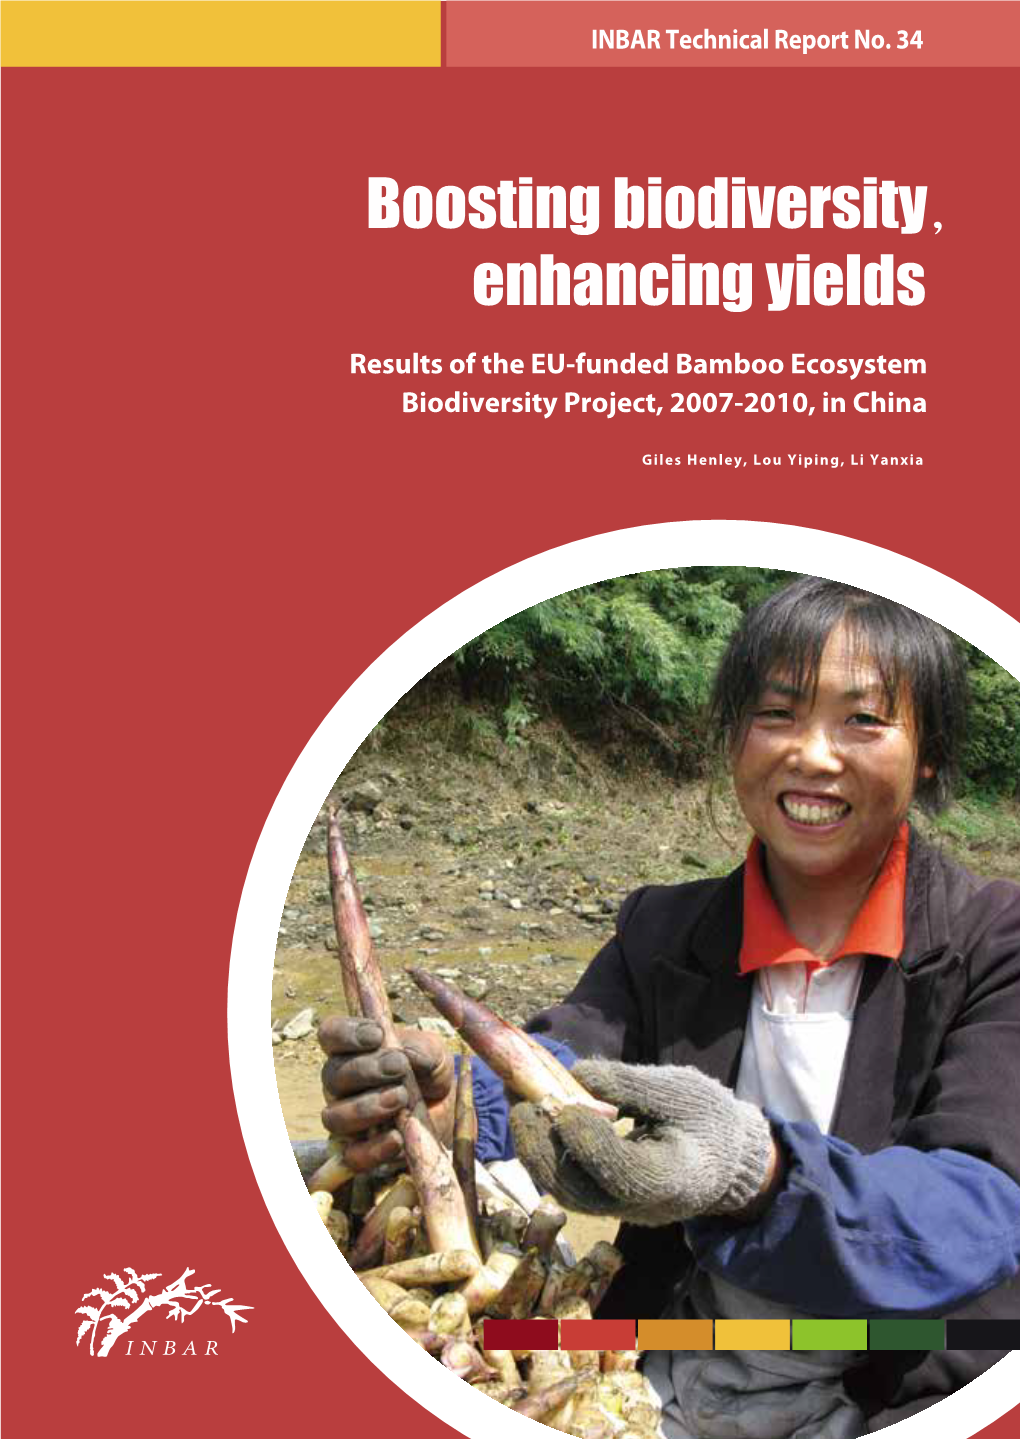 Boosting Biodiversity, Enhancing Yields 2 Results of the EU-Funded Bamboo Ecosystem Biodiversity Project, 2007-2010 in China